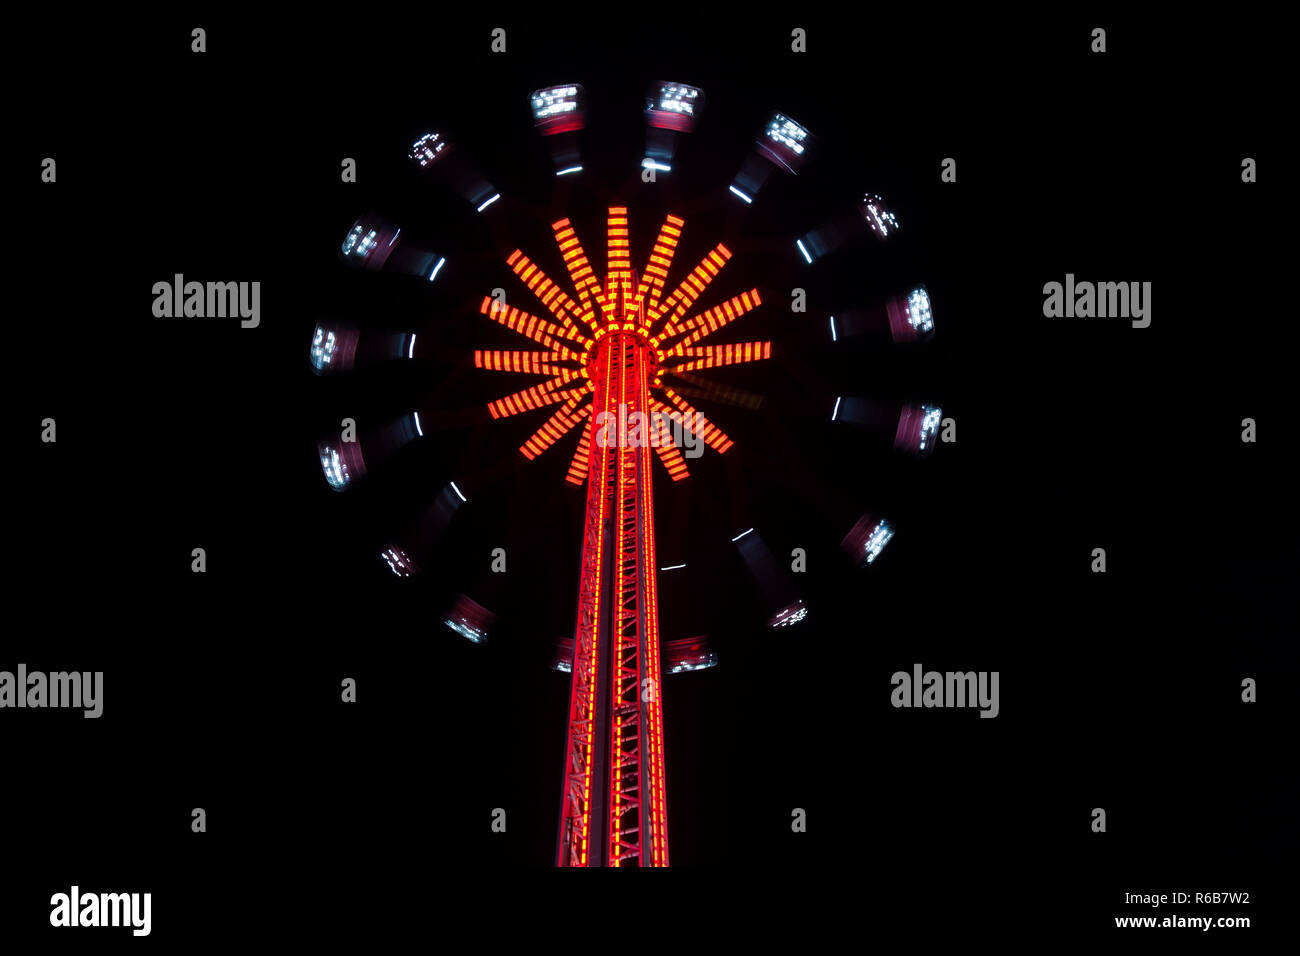 Blur action image of a fair ground ride London, UK Stock Photo